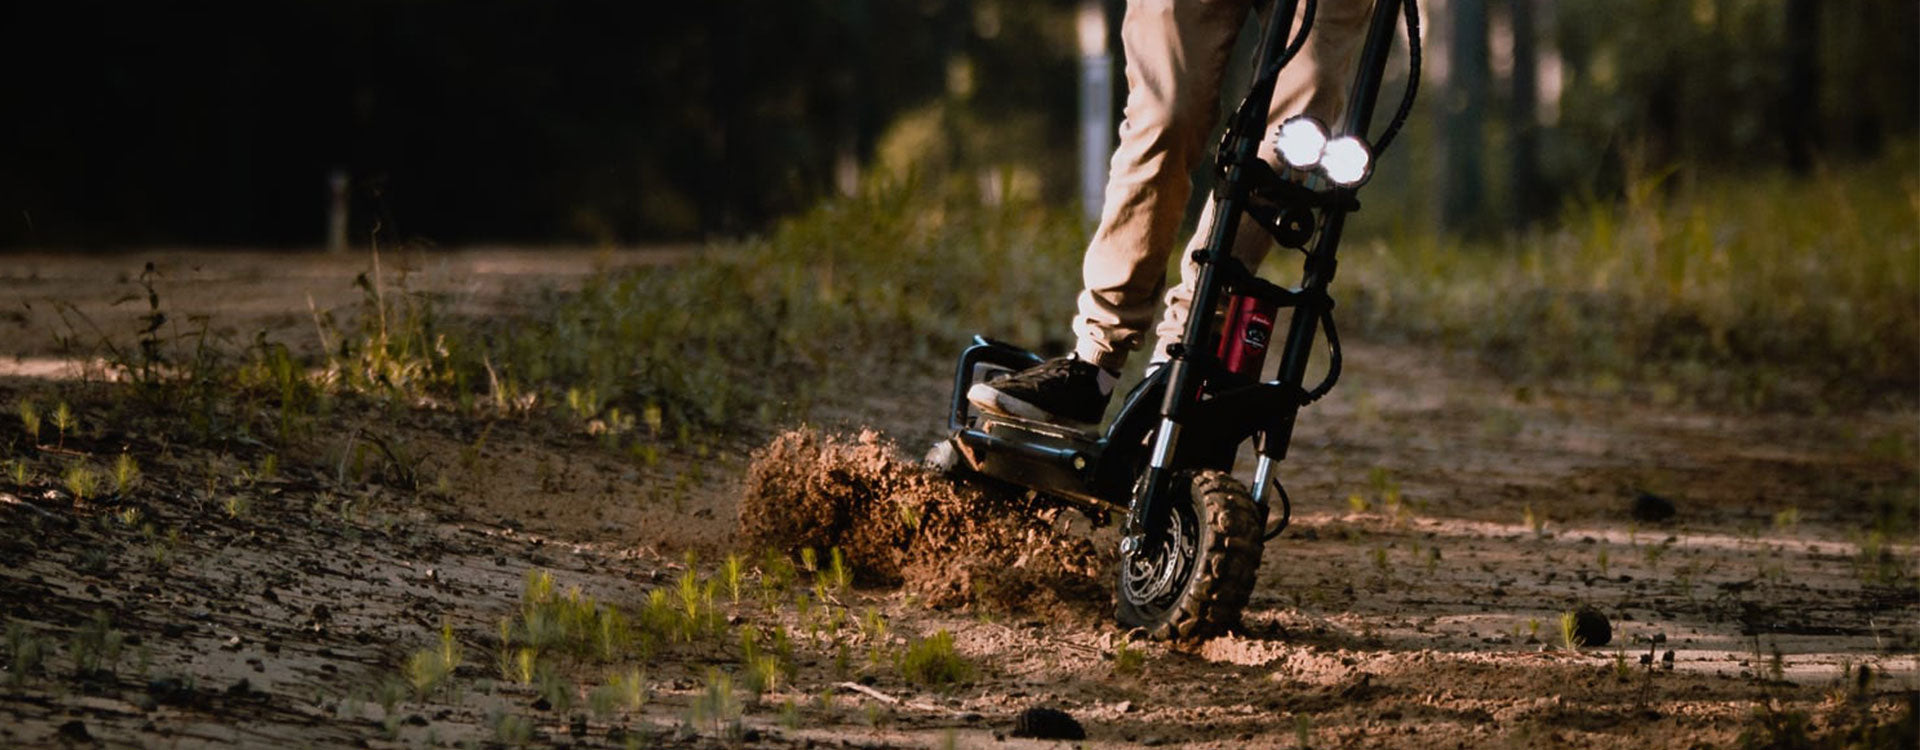 Kaabo-USA-Wolf-Warrior-11-Dual-Motor-Scooter-Riding-in-the-Wild